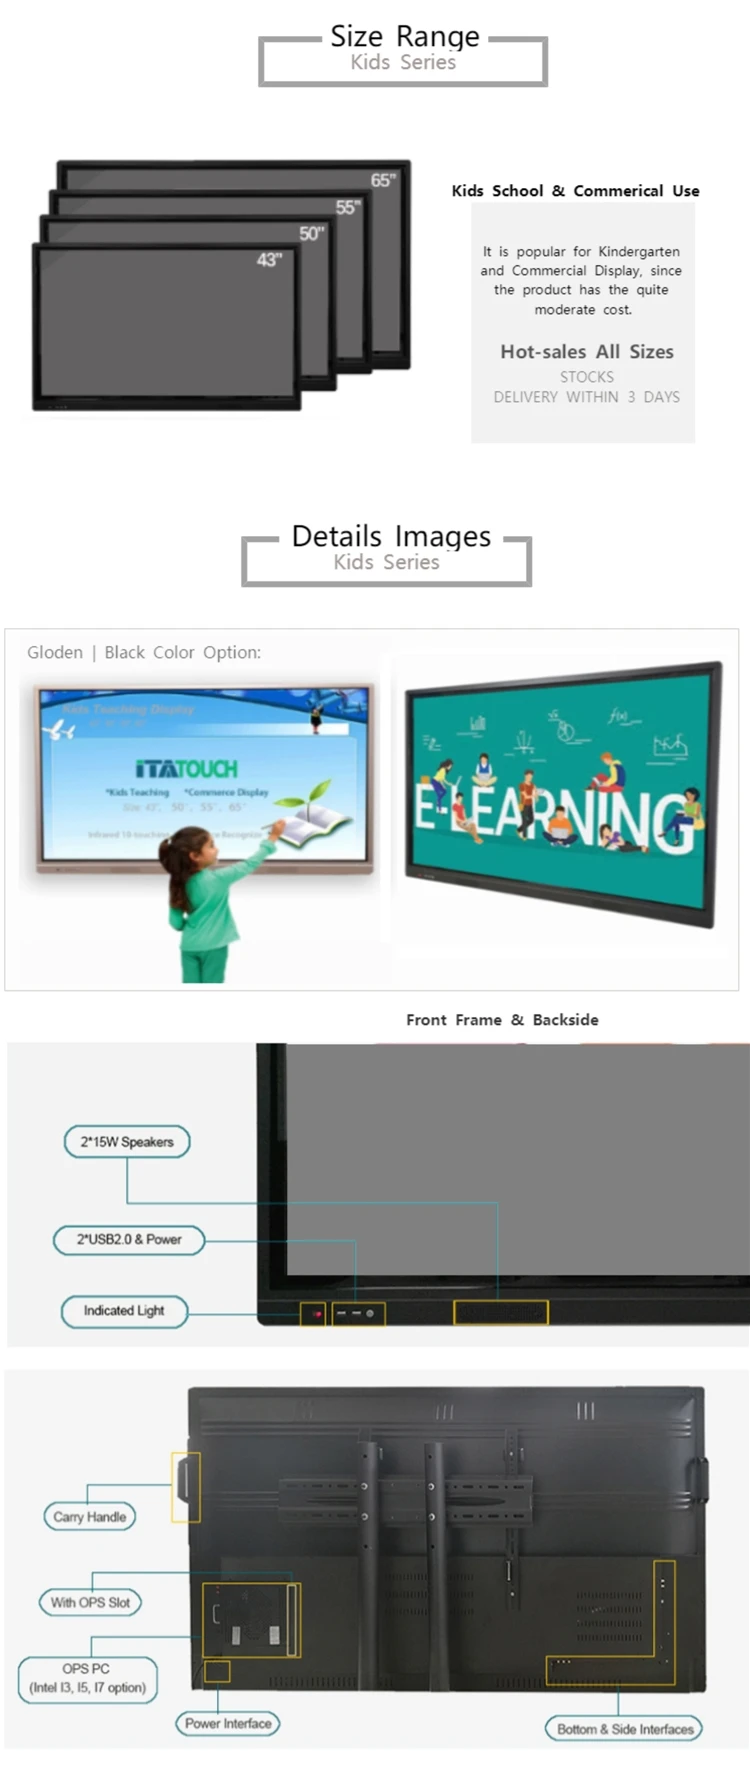 China Supplier Cheap Iwb Interactive Digital Board Smart Projector Touch Screen Whiteboard For School And Office